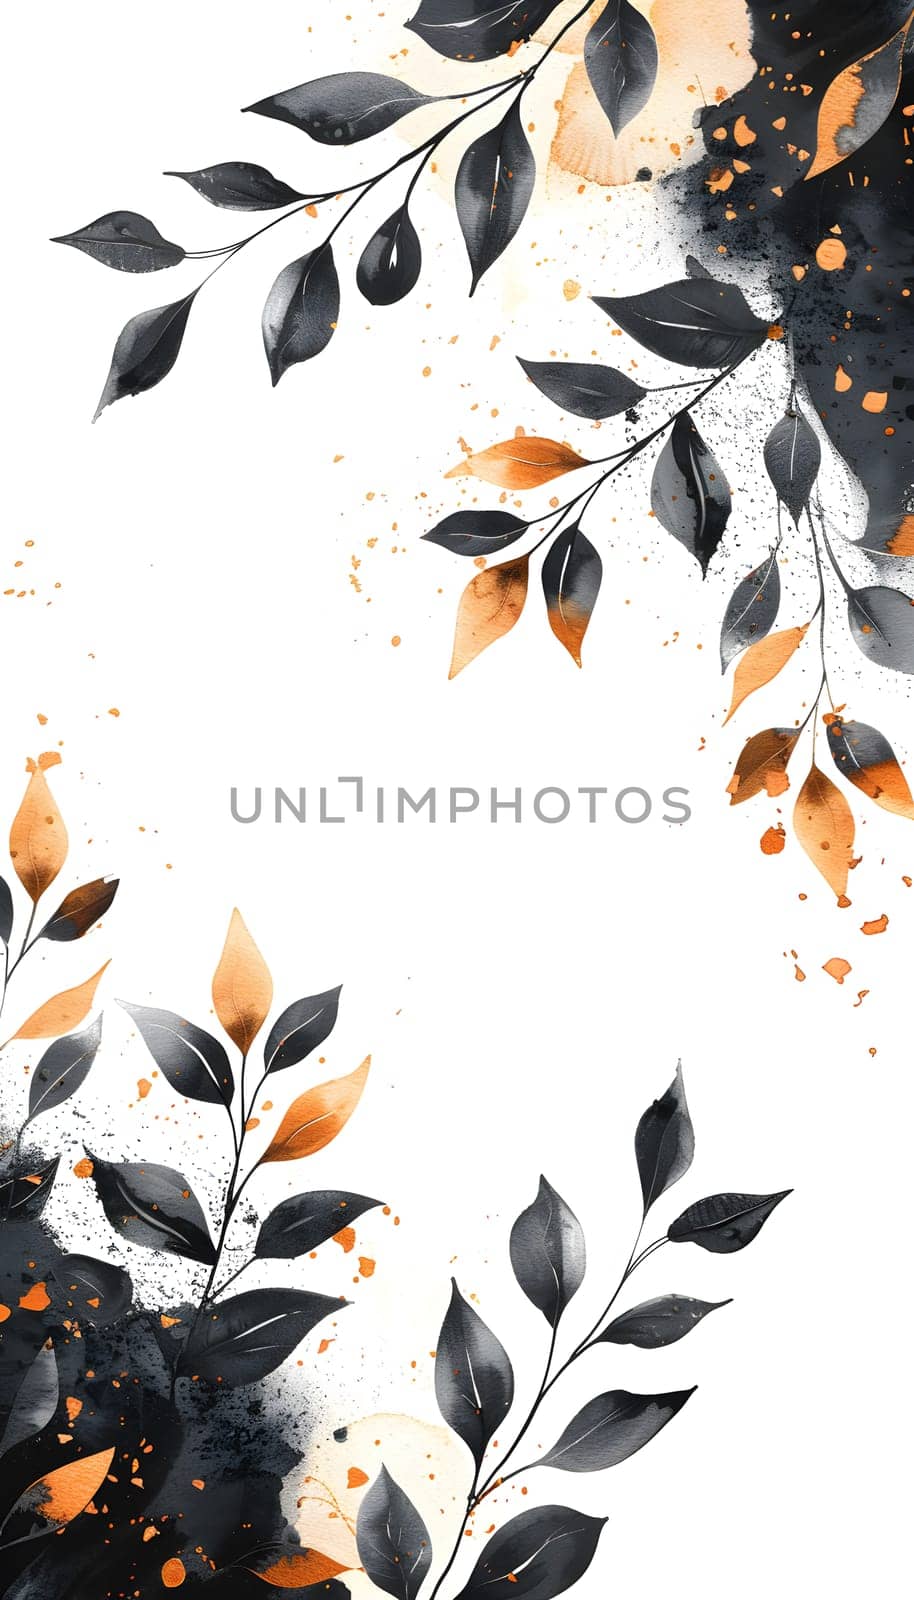 Watercolor painting of black and orange leaves on white background by Nadtochiy